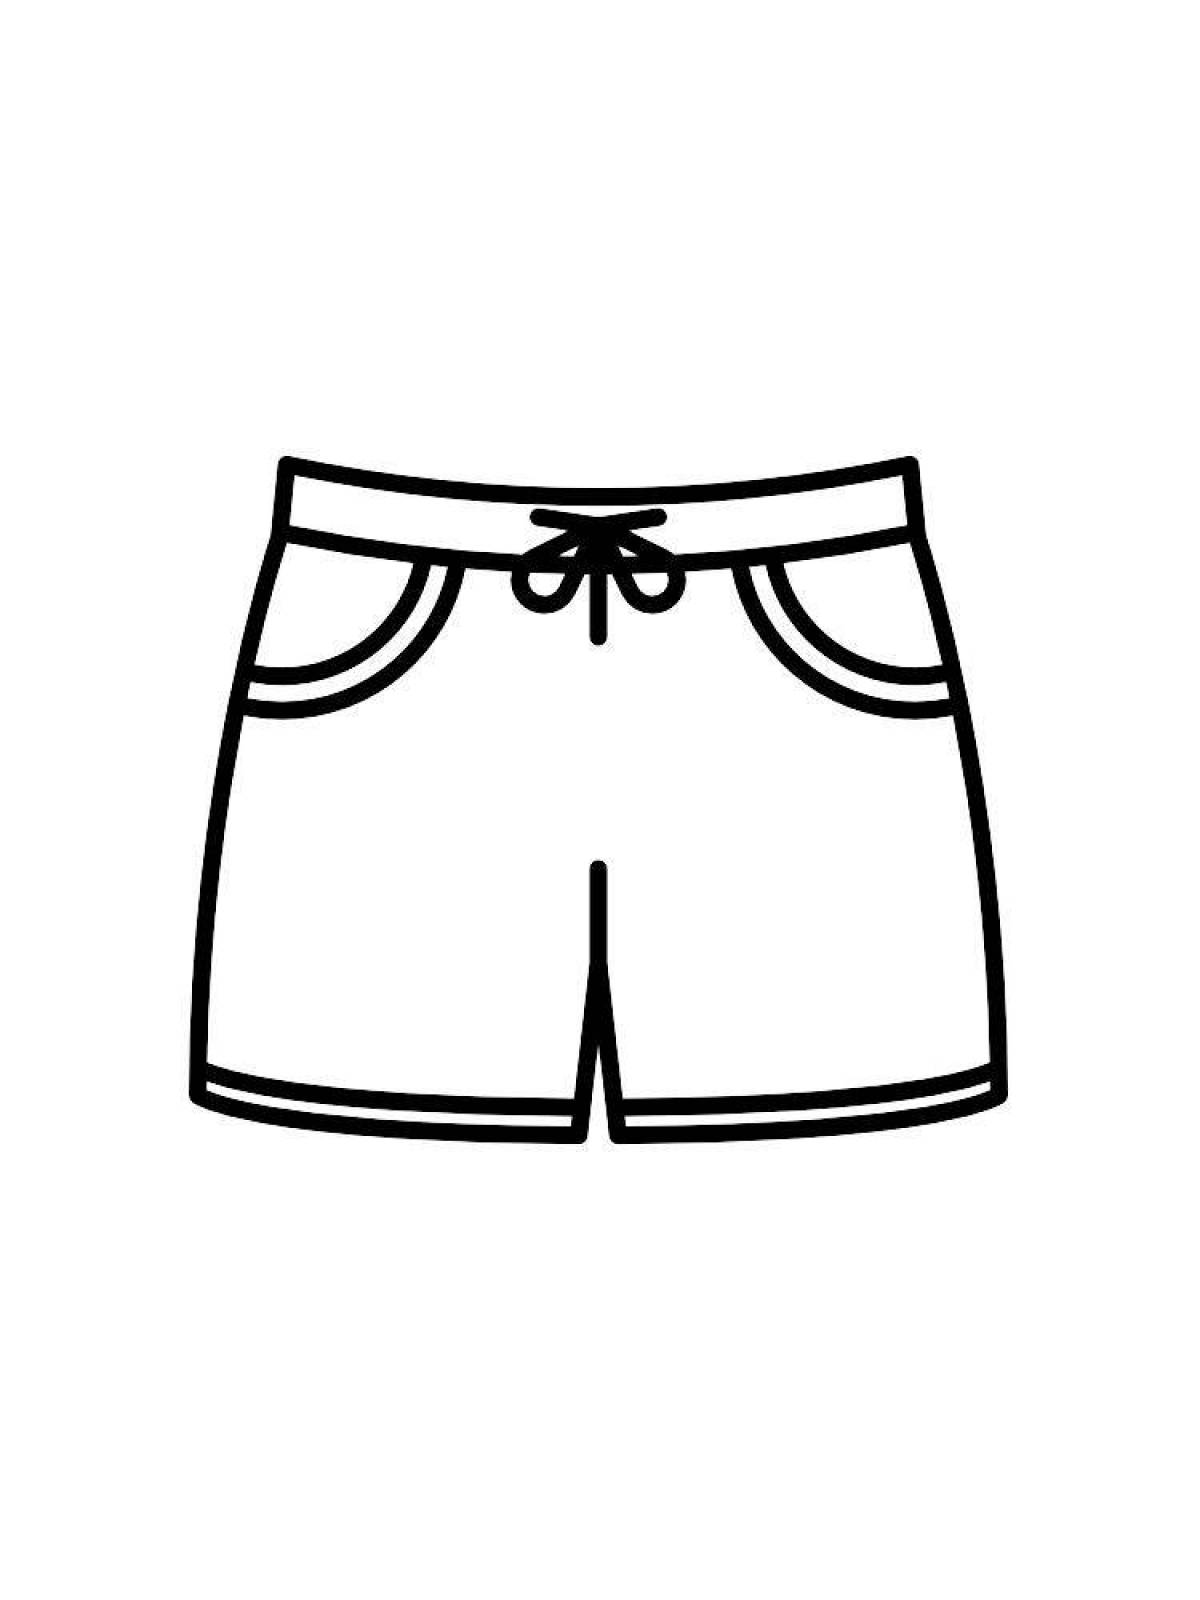 Sweet shorts coloring page